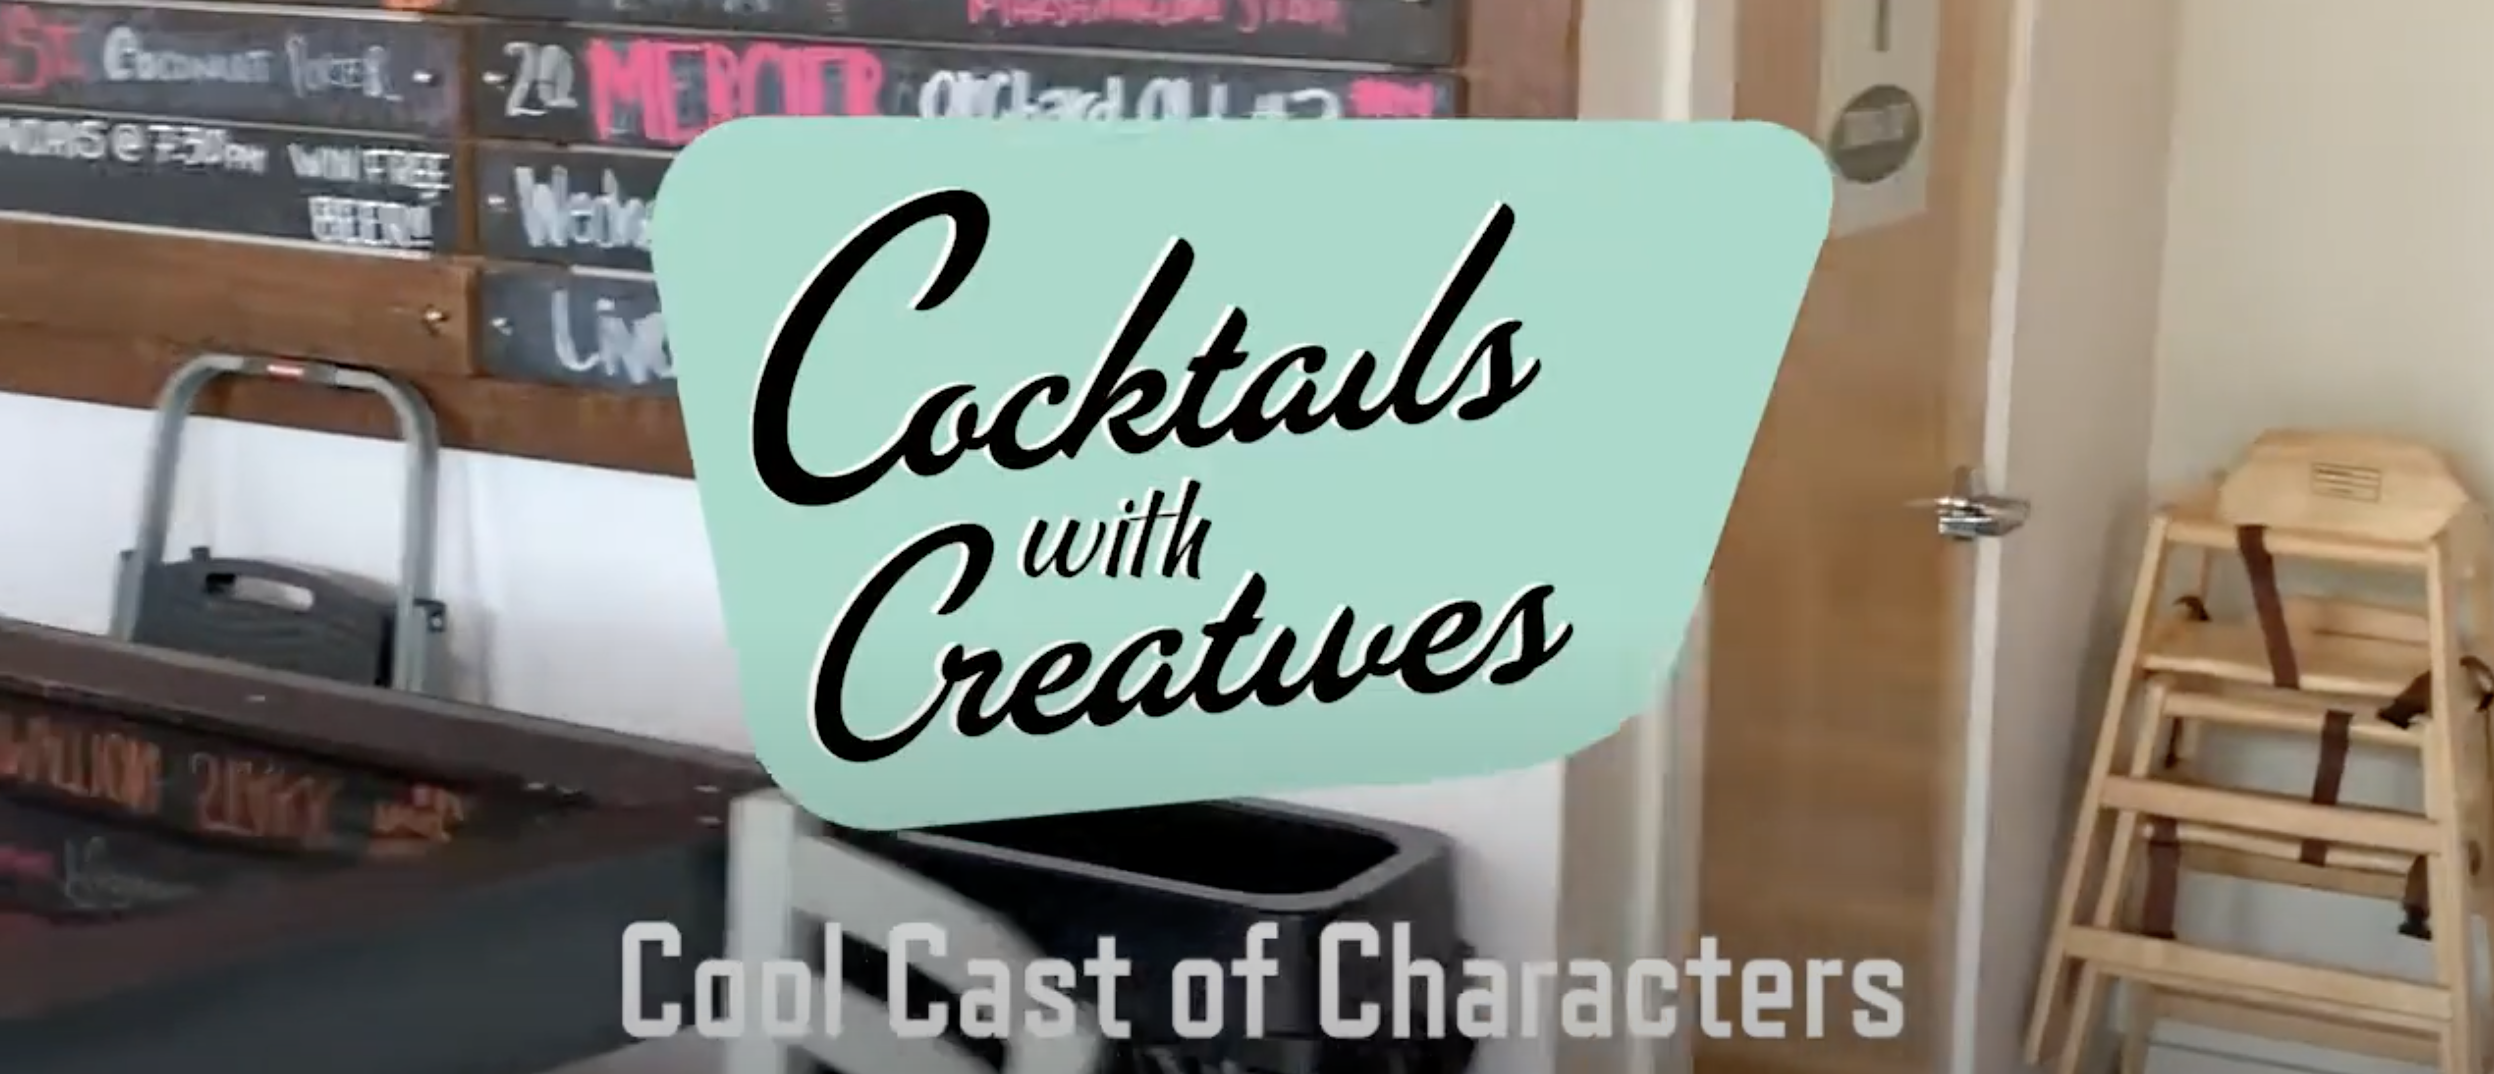 Cocktails with Creatives - Cool Cast of Characters